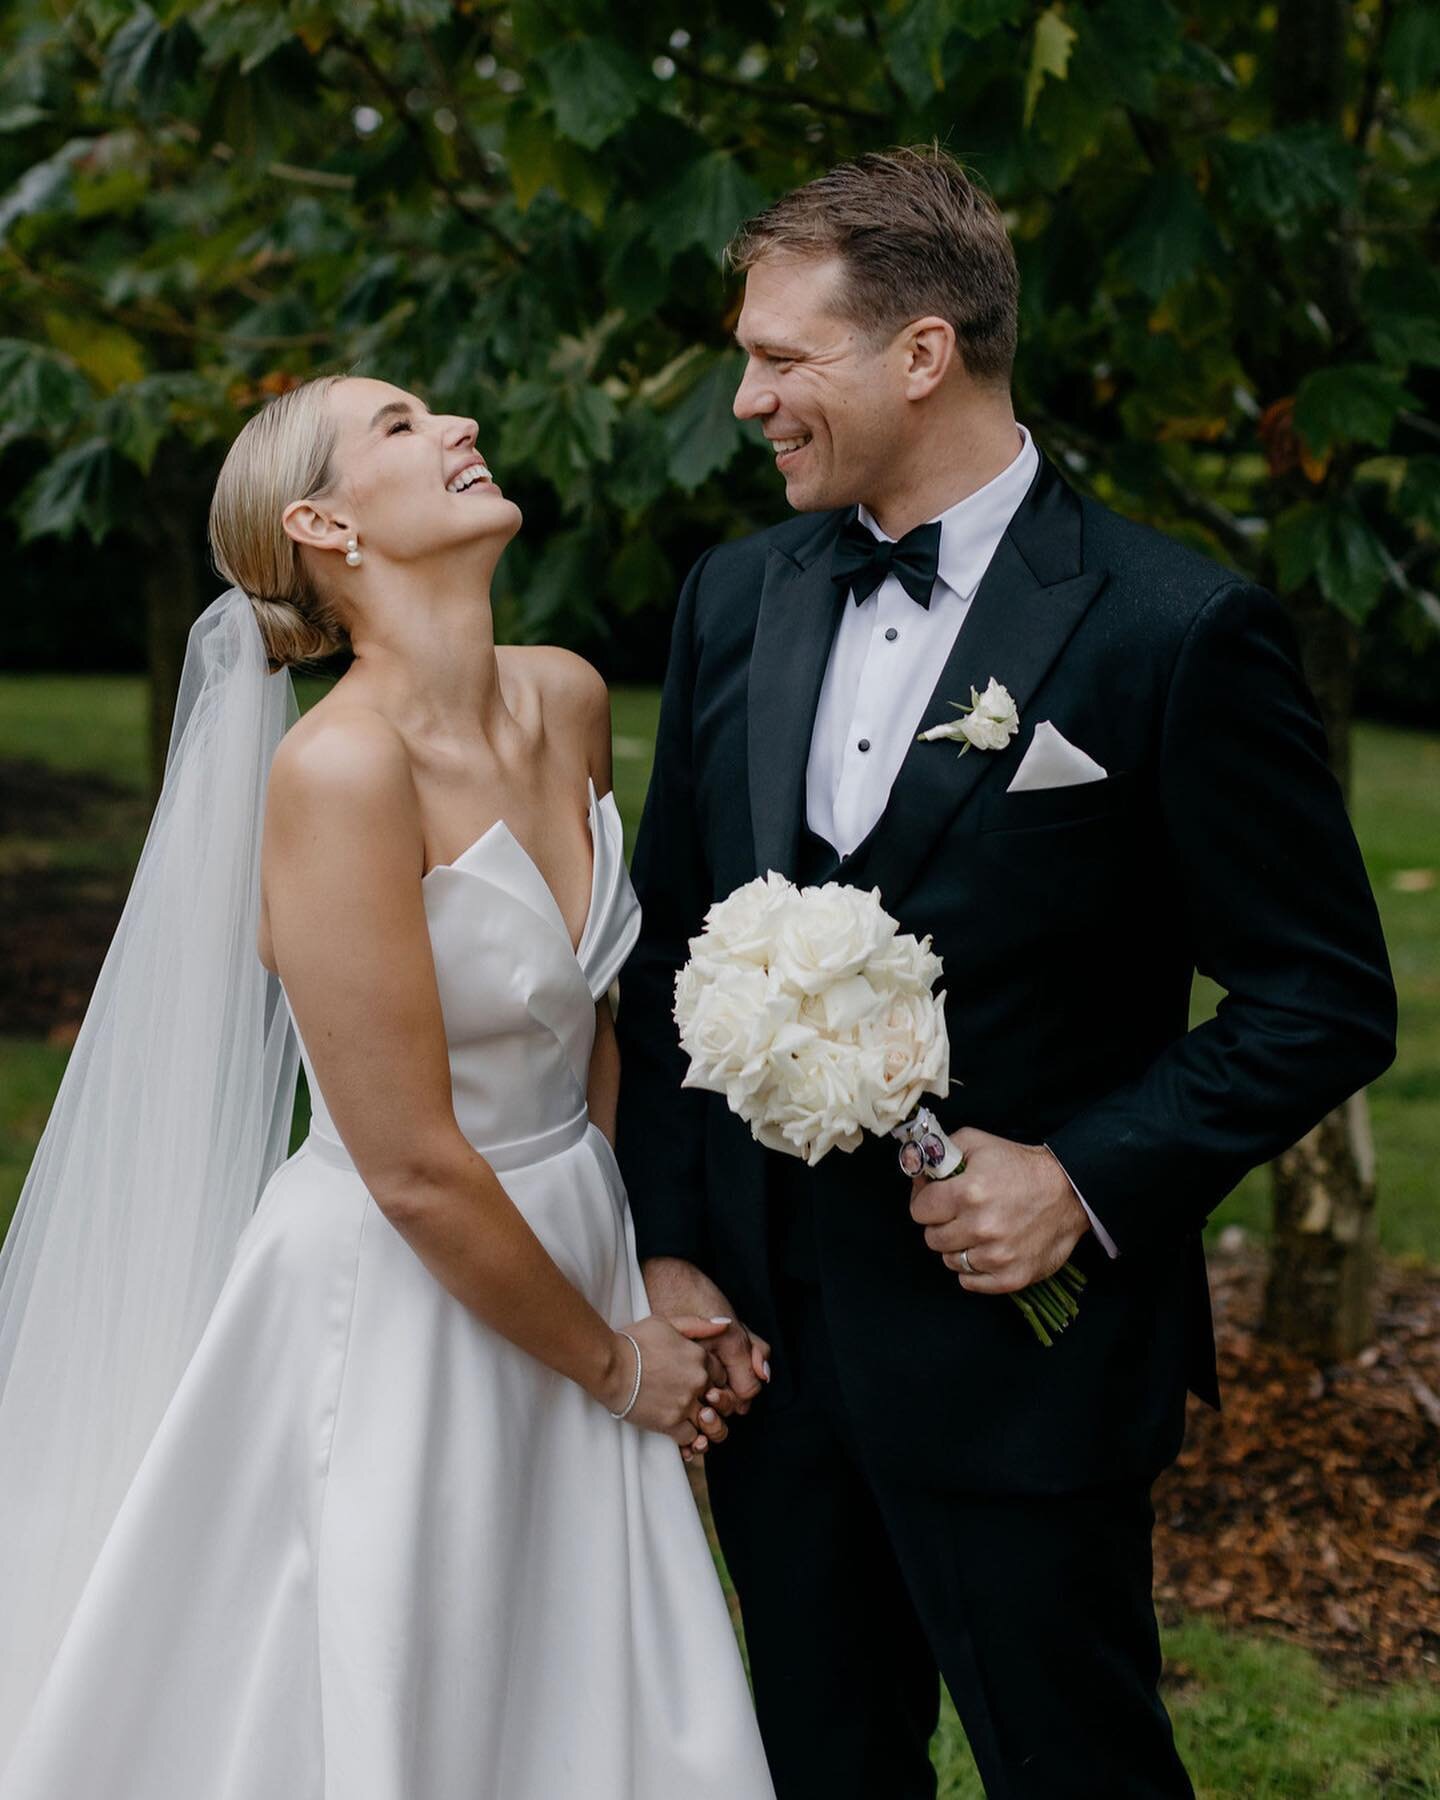 A little rain could not damper Chez &amp; Tim's wedding day at their family's stunning property in the Southern Highlands. We LOVE reliving the happiness and elegance of this day from these photos.
⠀⠀⠀⠀⠀⠀⠀⠀⠀
PHOTOGRAPHER: @blaisebell
VIDEOGRAPHER: @m